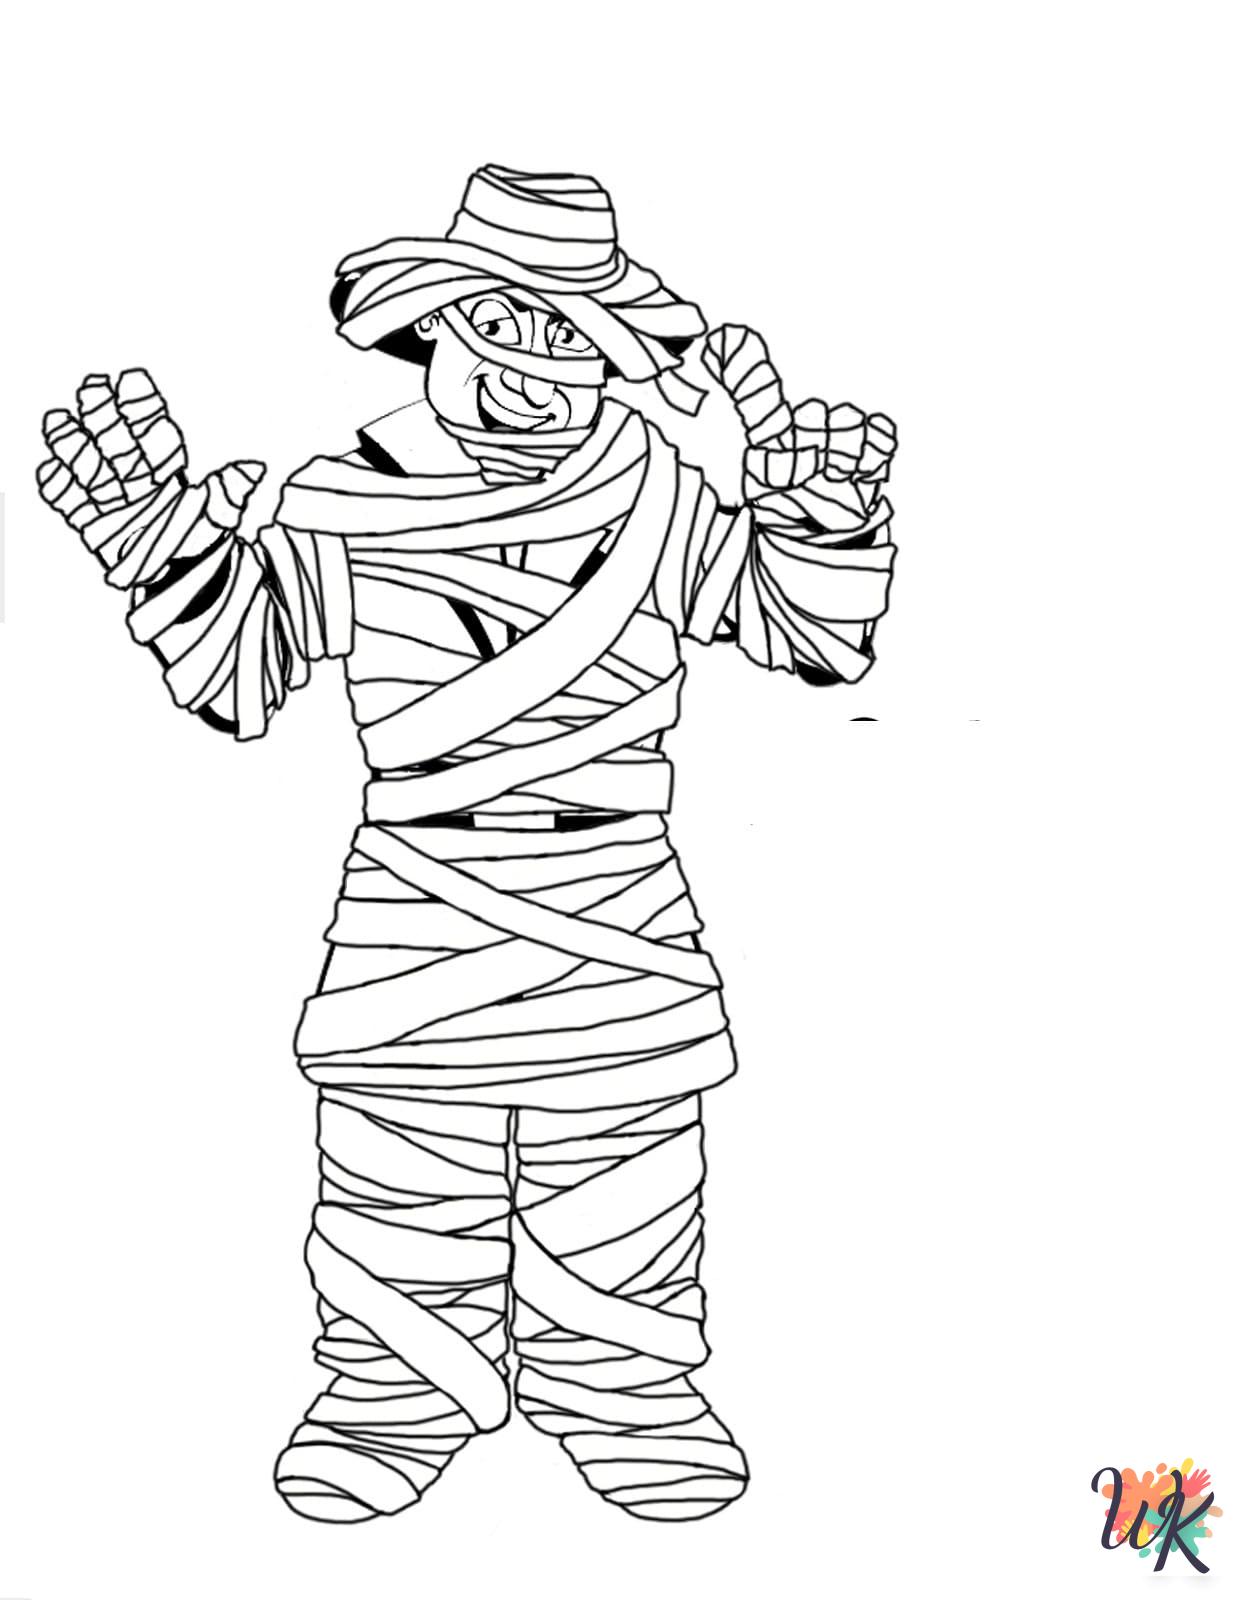 Mummy coloring pages pdf 3